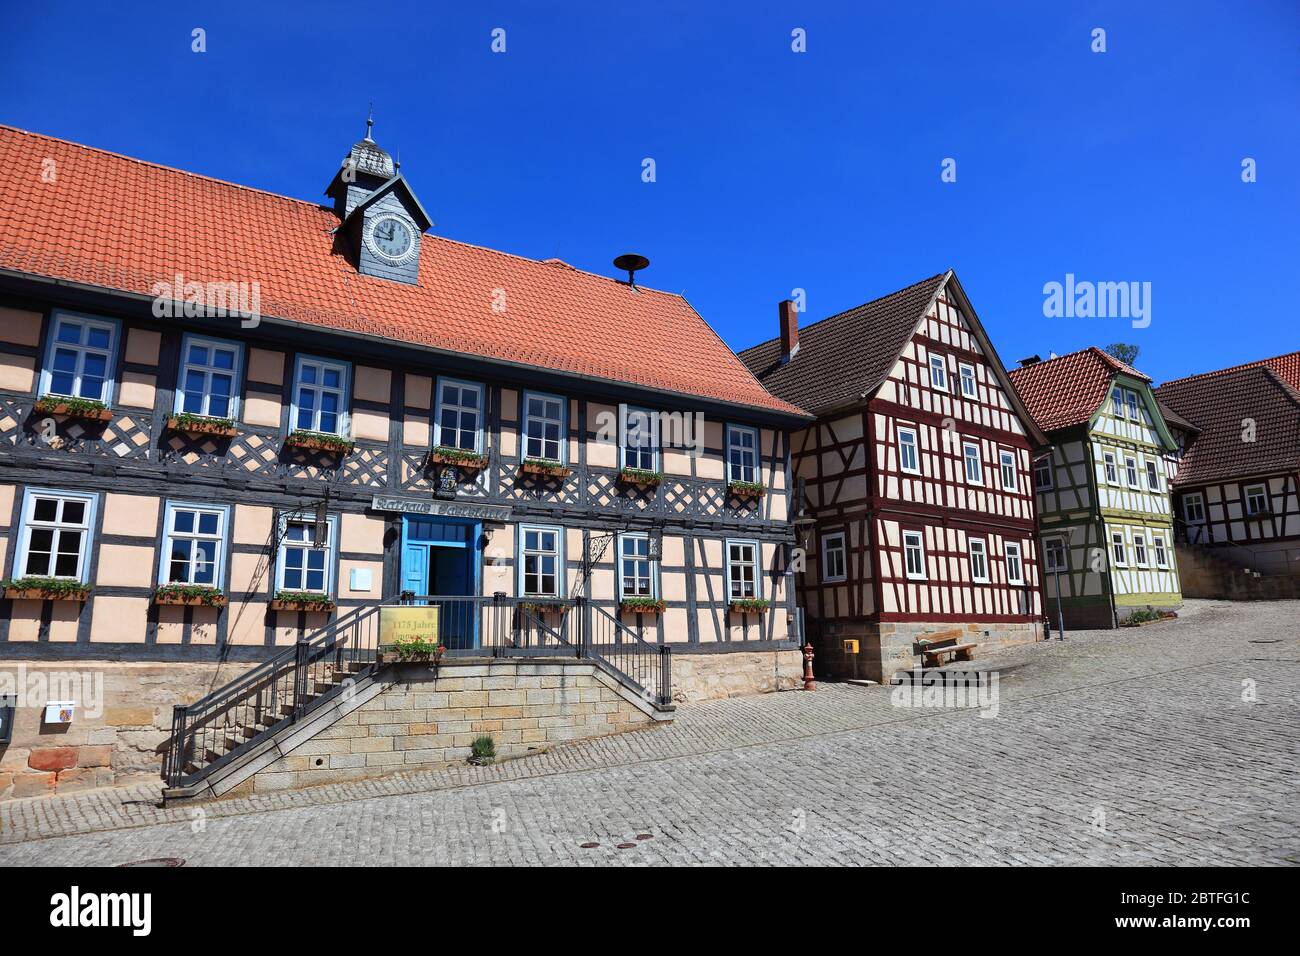 Second smallest city in Germany, Ummerstadt in the district of Hildburghausen, Marktplatz with the historic Town Hall, built in 1558, half-timbered ho Stock Photo